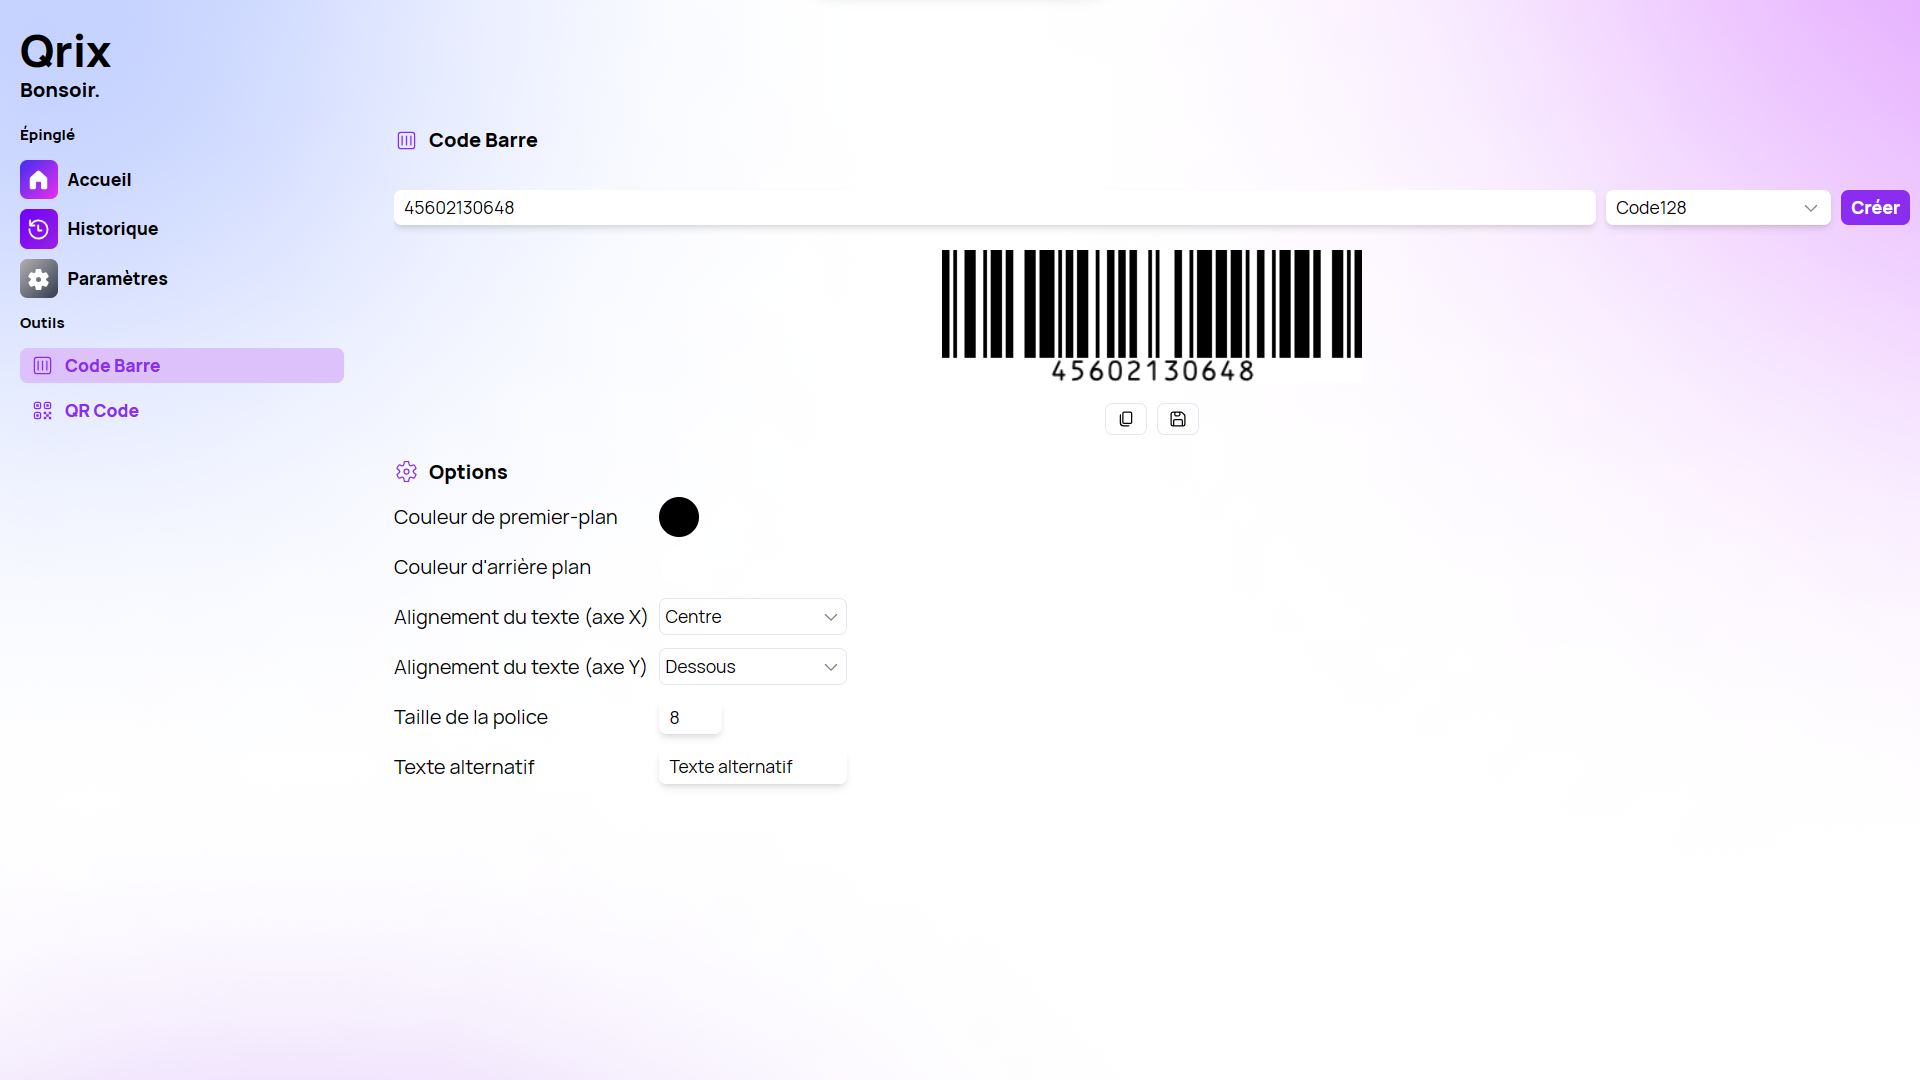 A screenshot of the 'Bar Code' page of Qrix